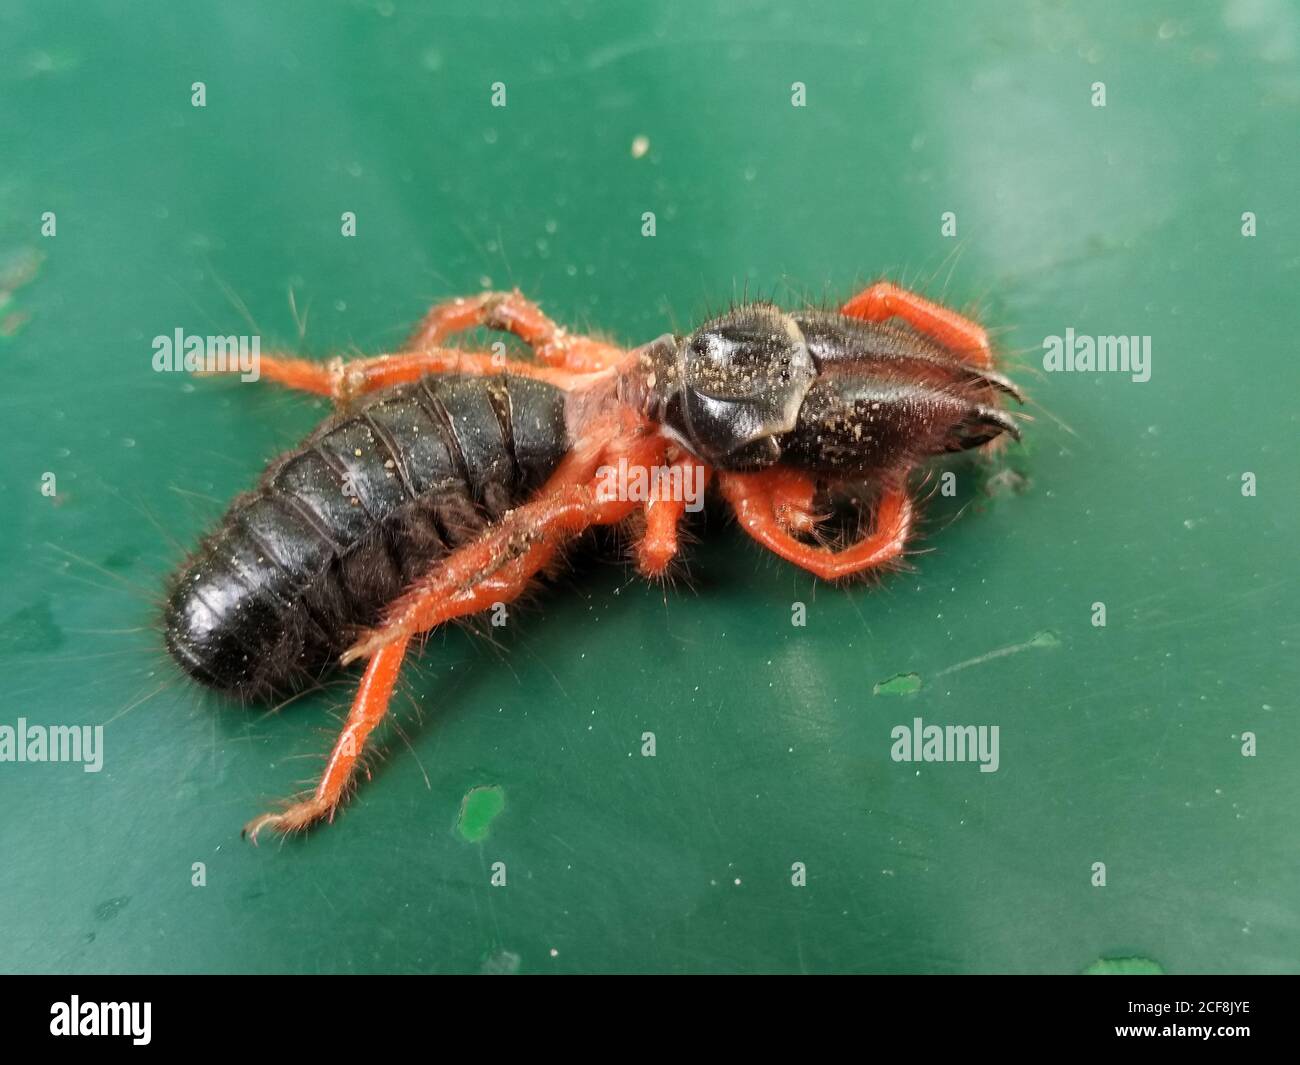 A picture of black ant with blur background Stock Photo